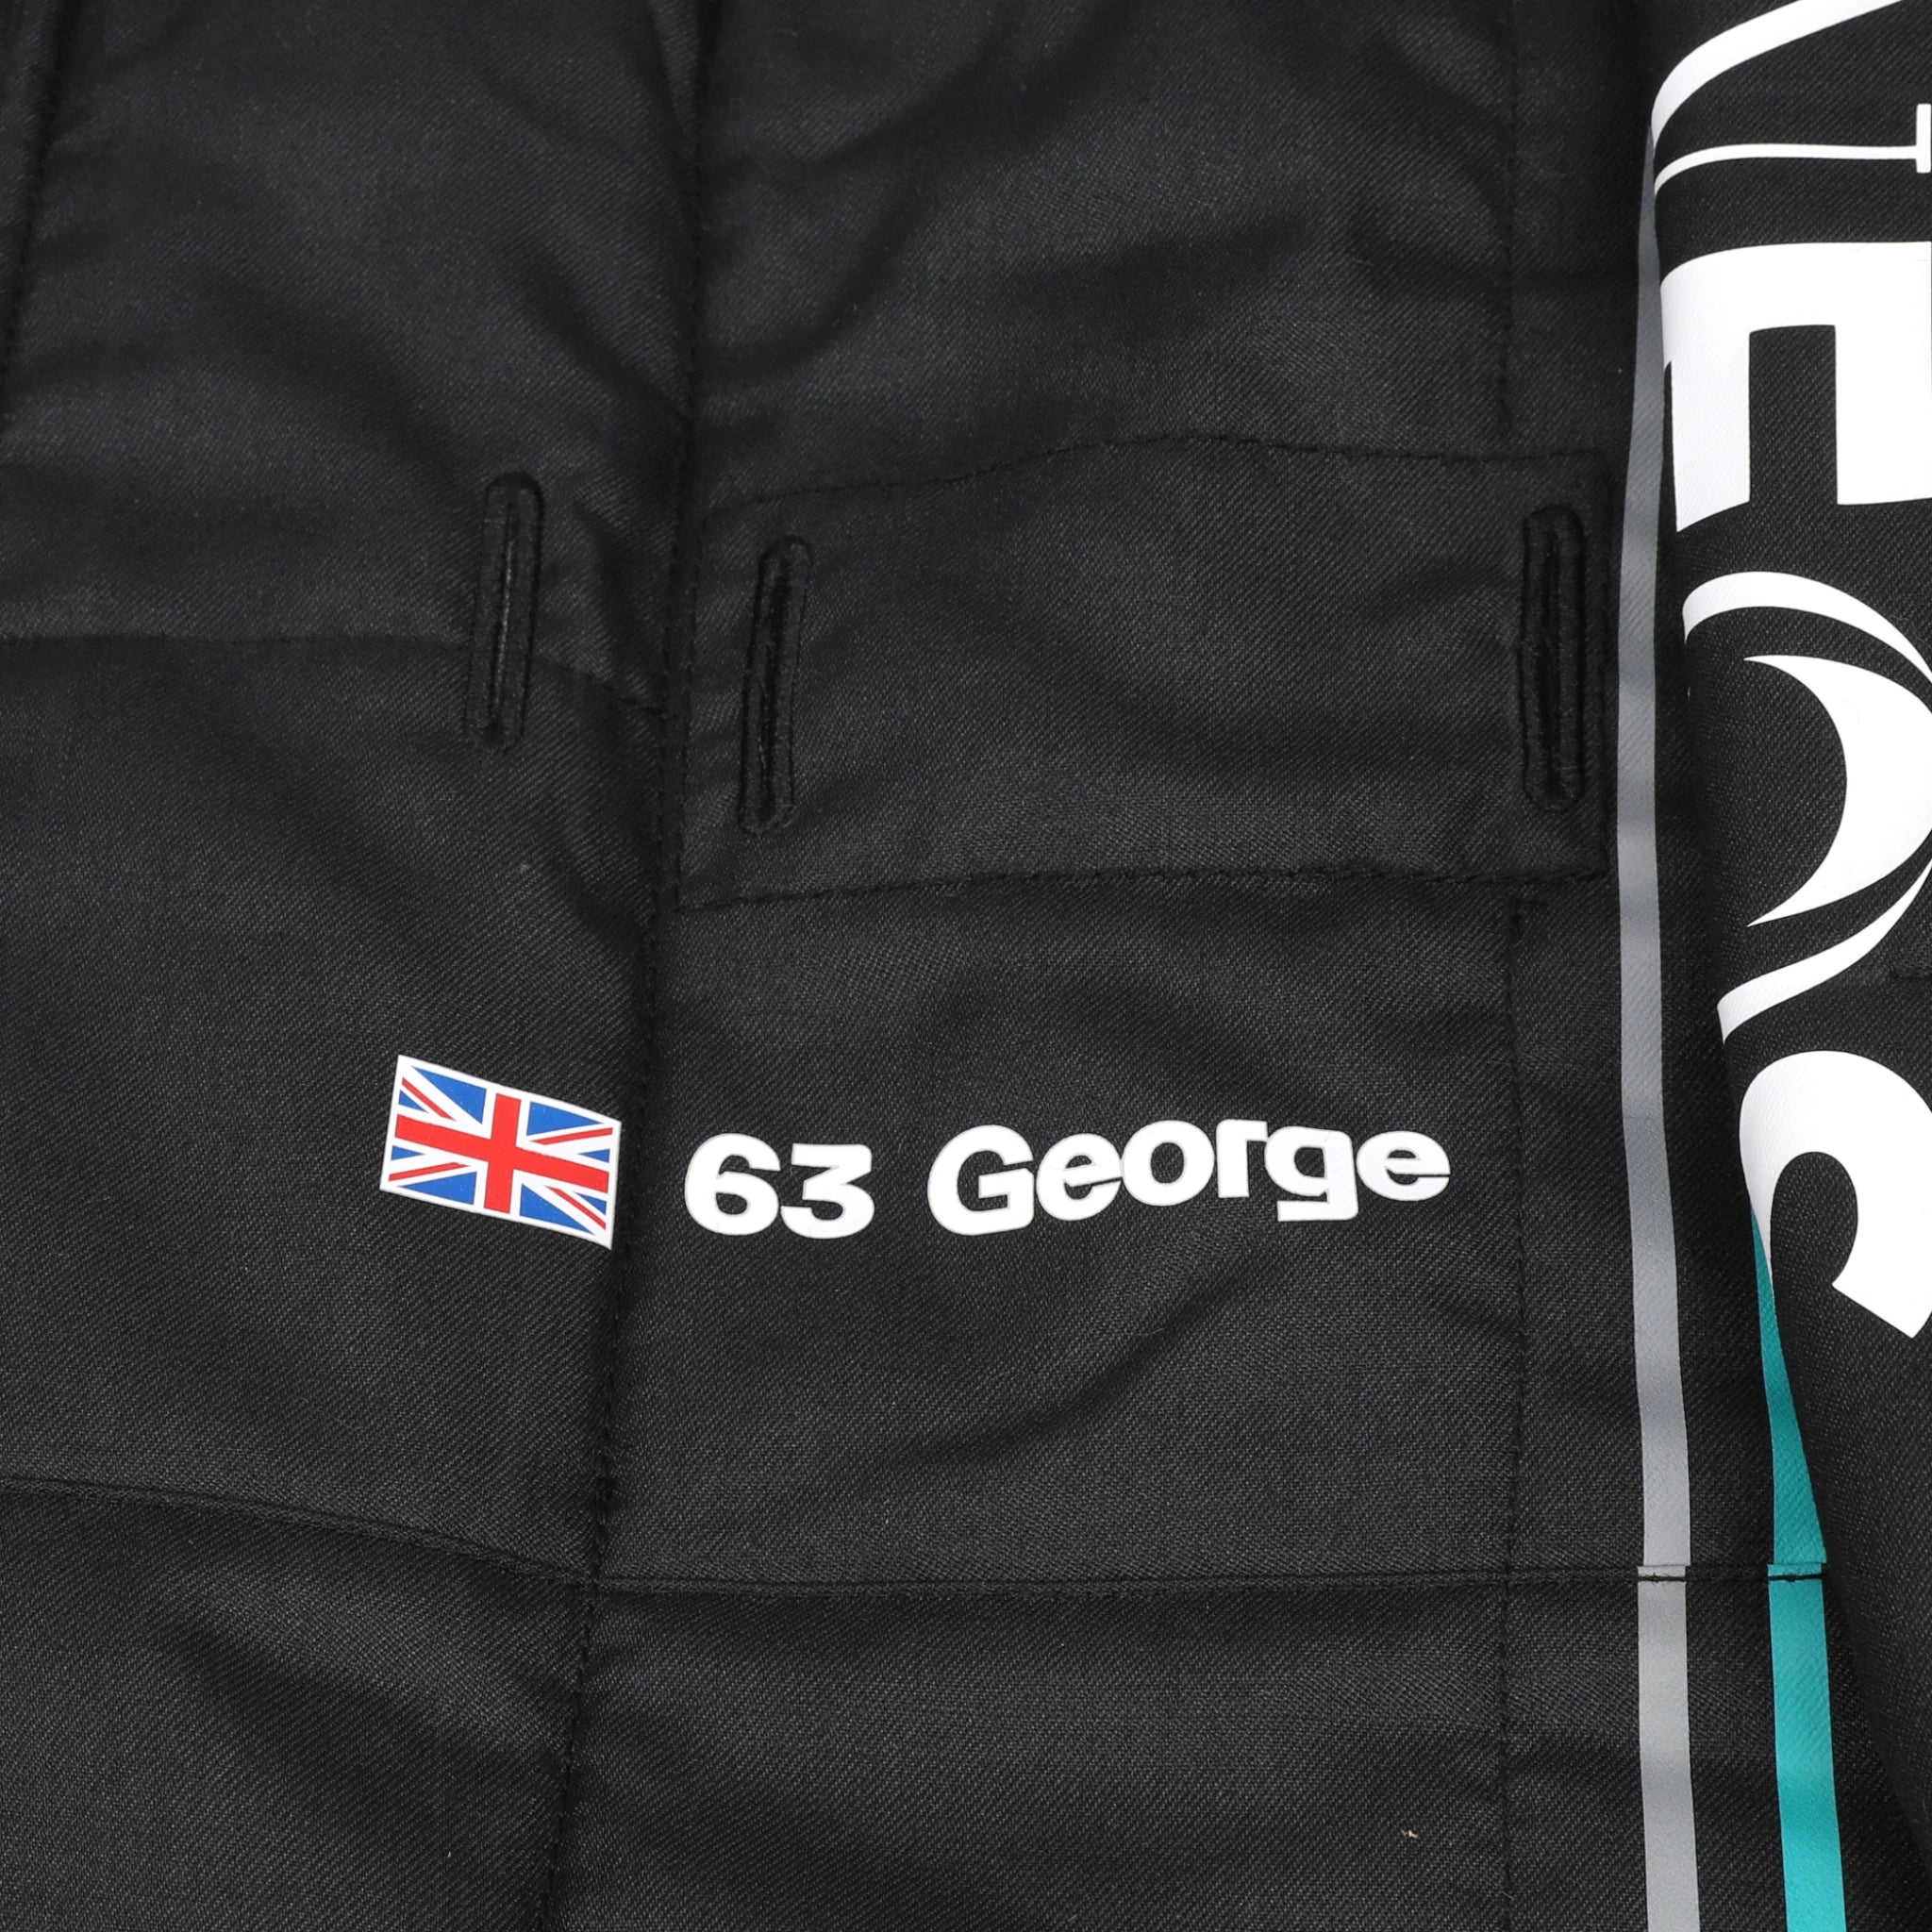 2023 George Russell Mercedes-AMG Petronas F1 Team Replica Race Suit